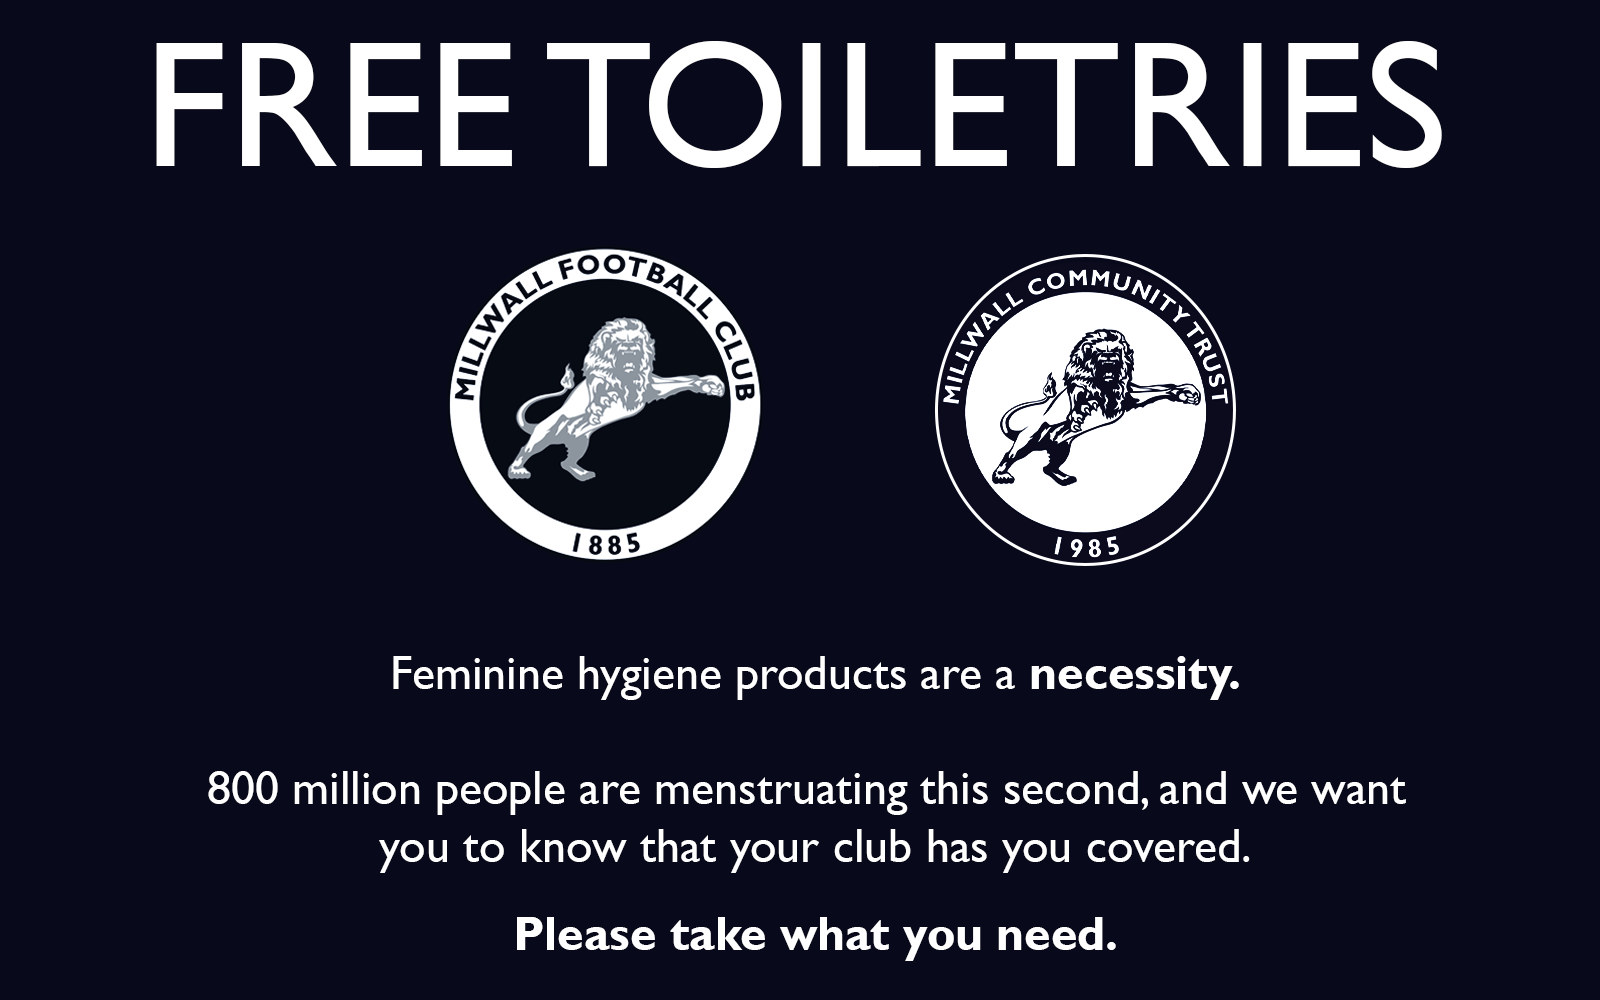 Millwall Community Trust - Millwall to Provide Free Sanitary Products at The Den and The Lions Centre